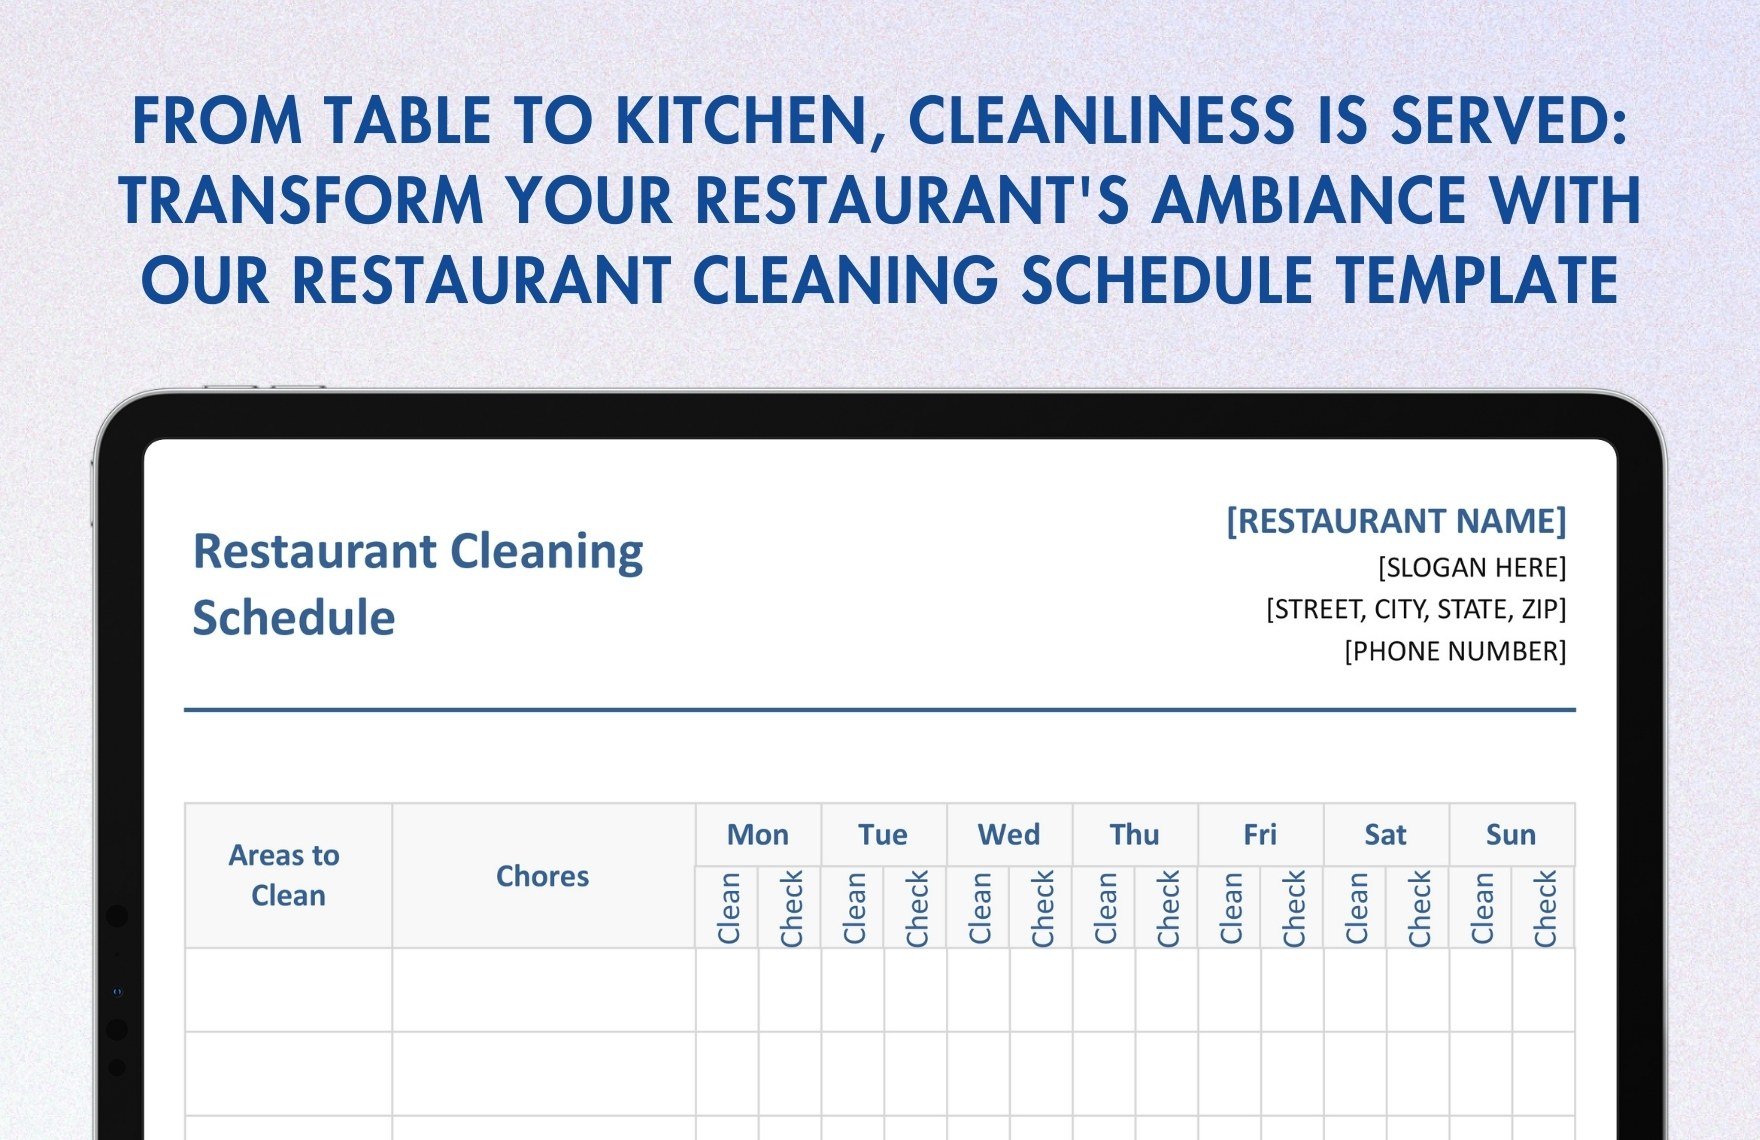 Sample Restaurant Cleaning Schedule Template